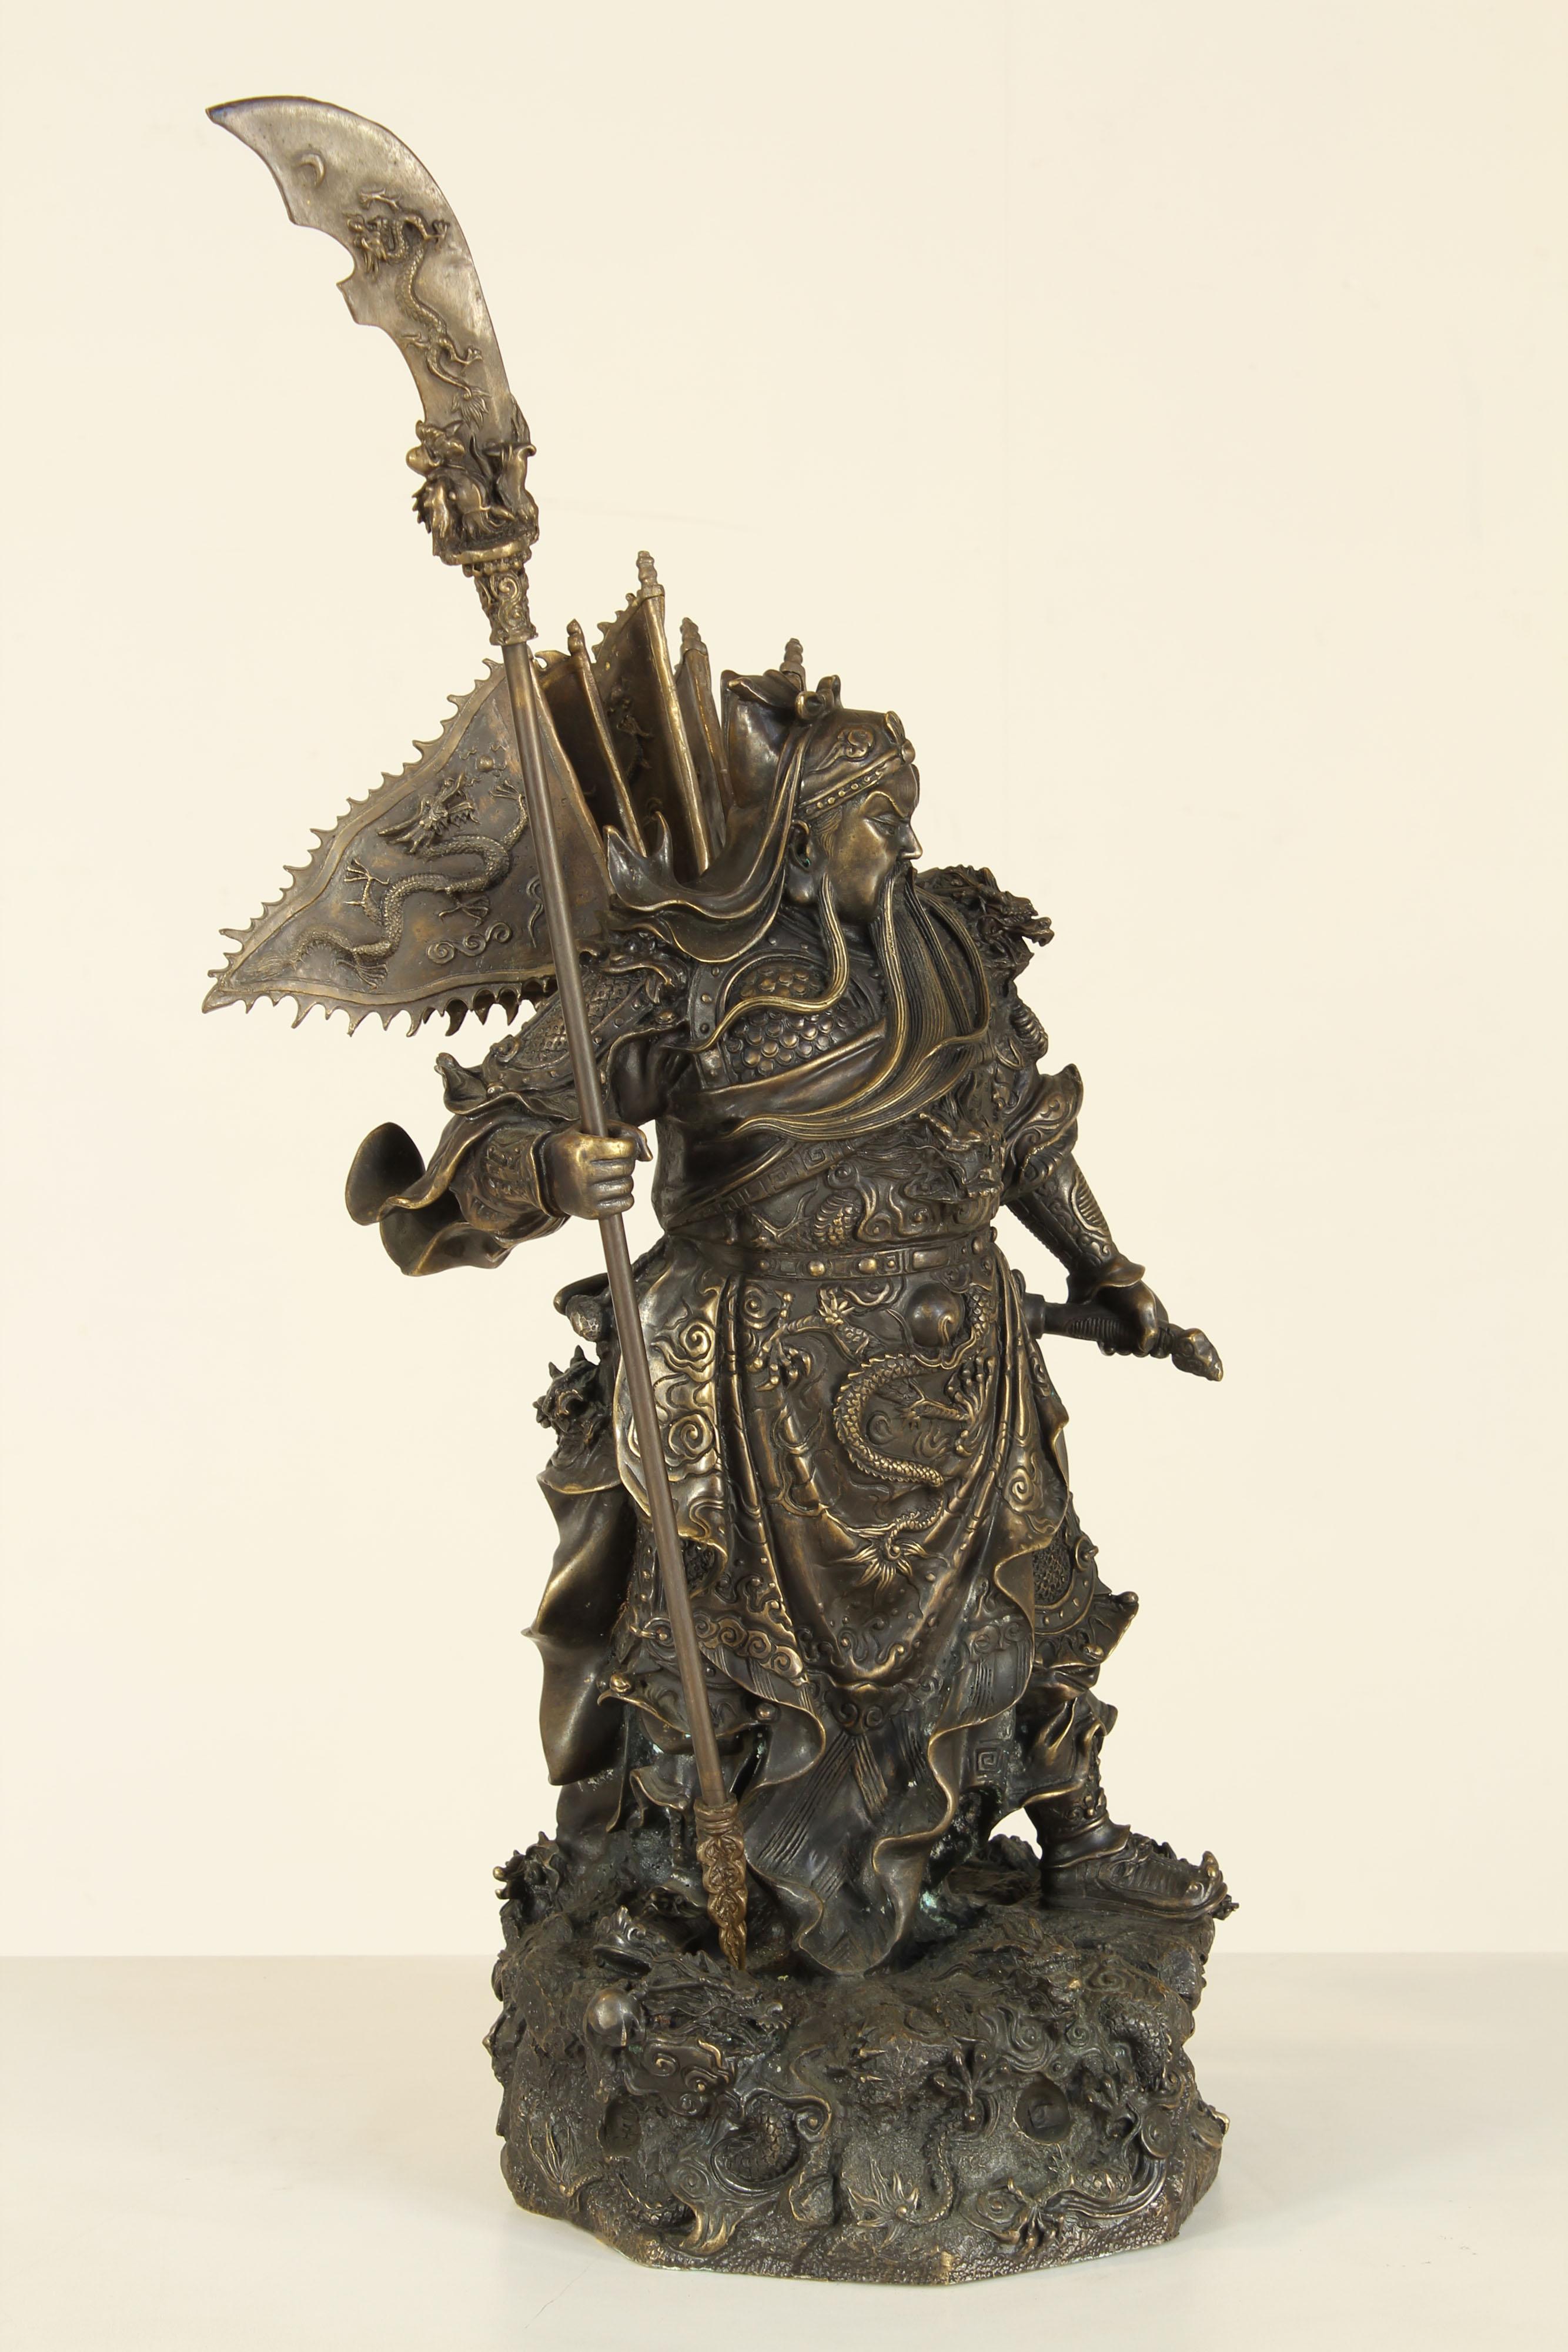 Imposing sculpture depicting God of war
High quality bronze material and was executed with incredible craftsmanship., finely chiseled.
Unknown author Japan circa 1950.
Packaging with bubble wrap and cardboard boxes is included. If the wooden